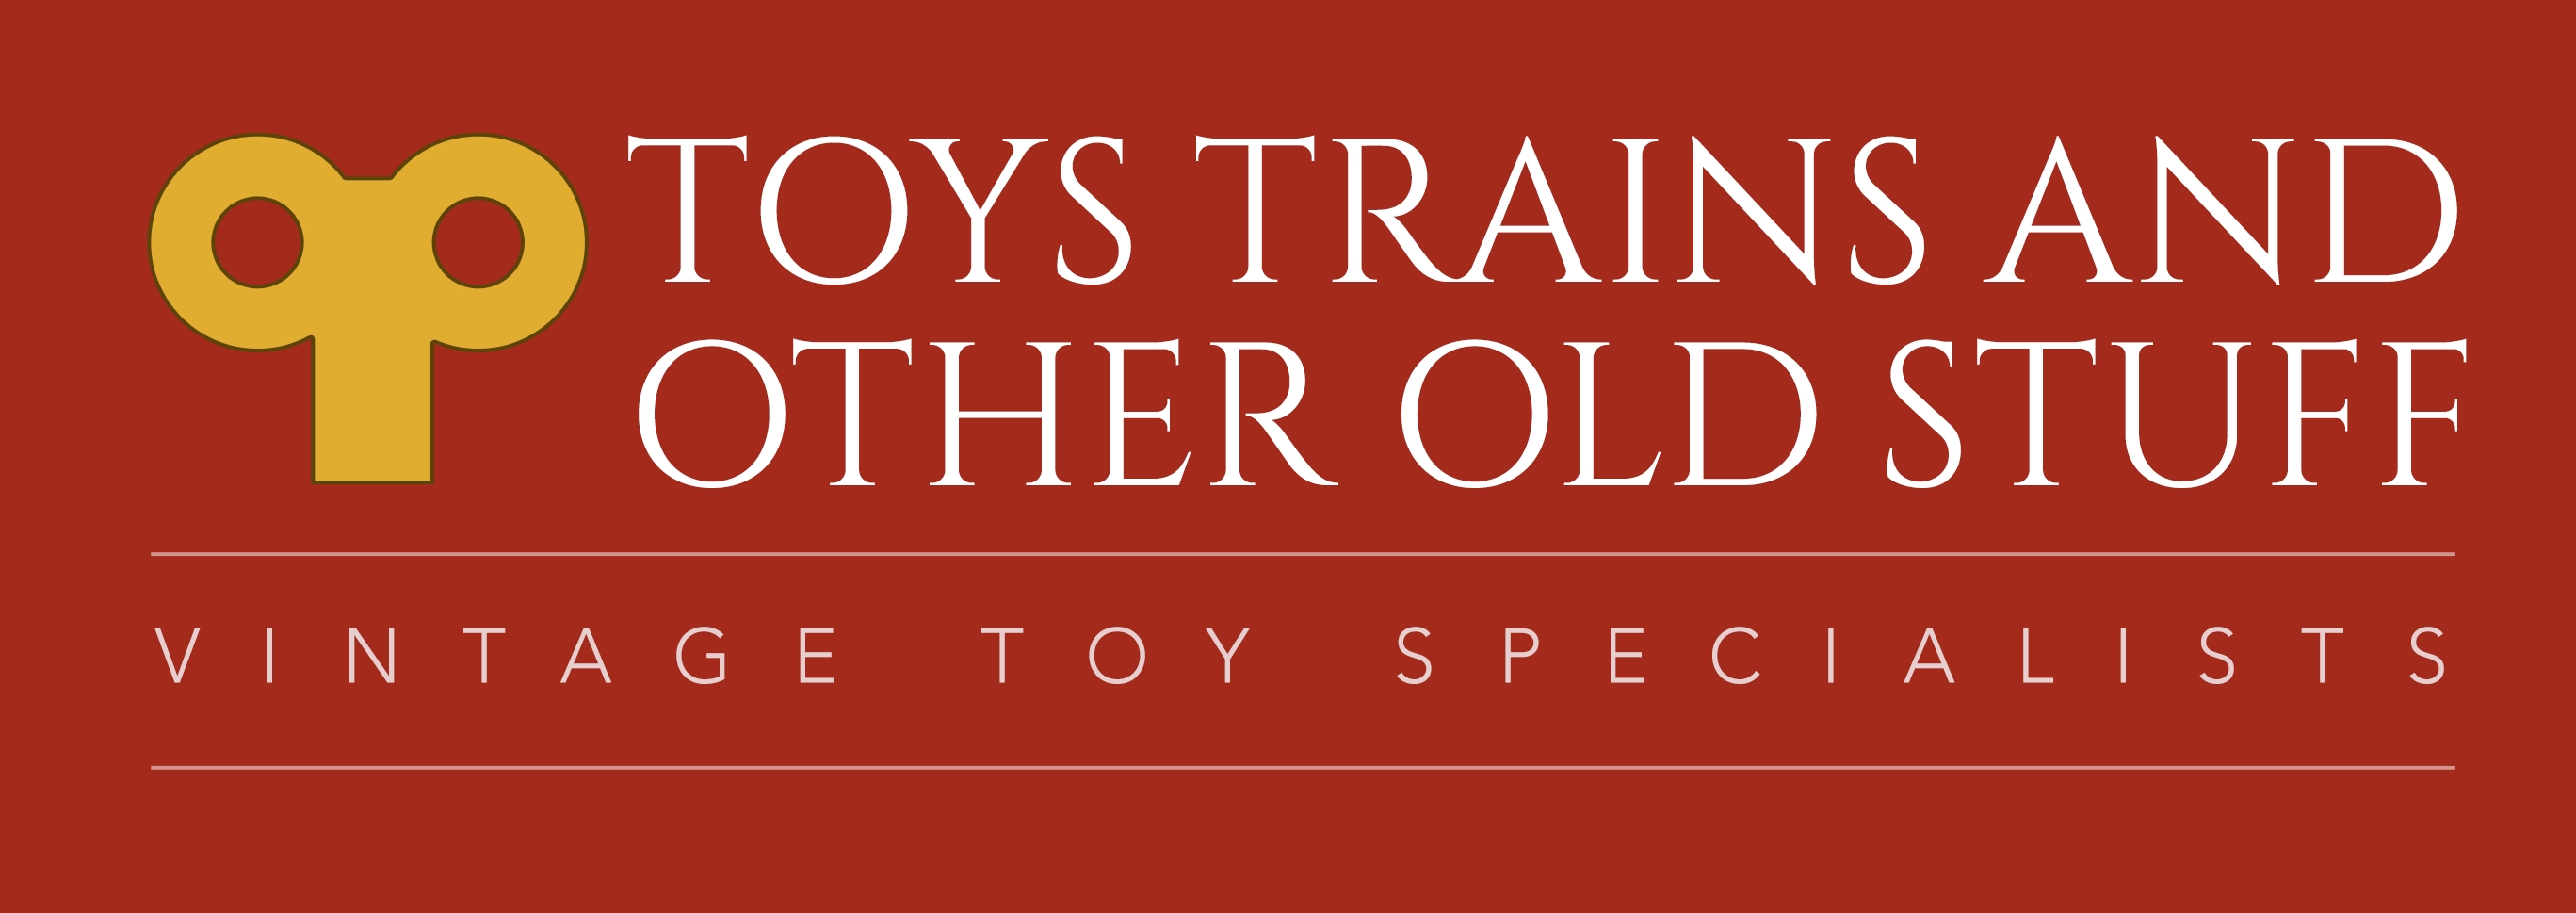 Toys Trains and Other Old Stuff